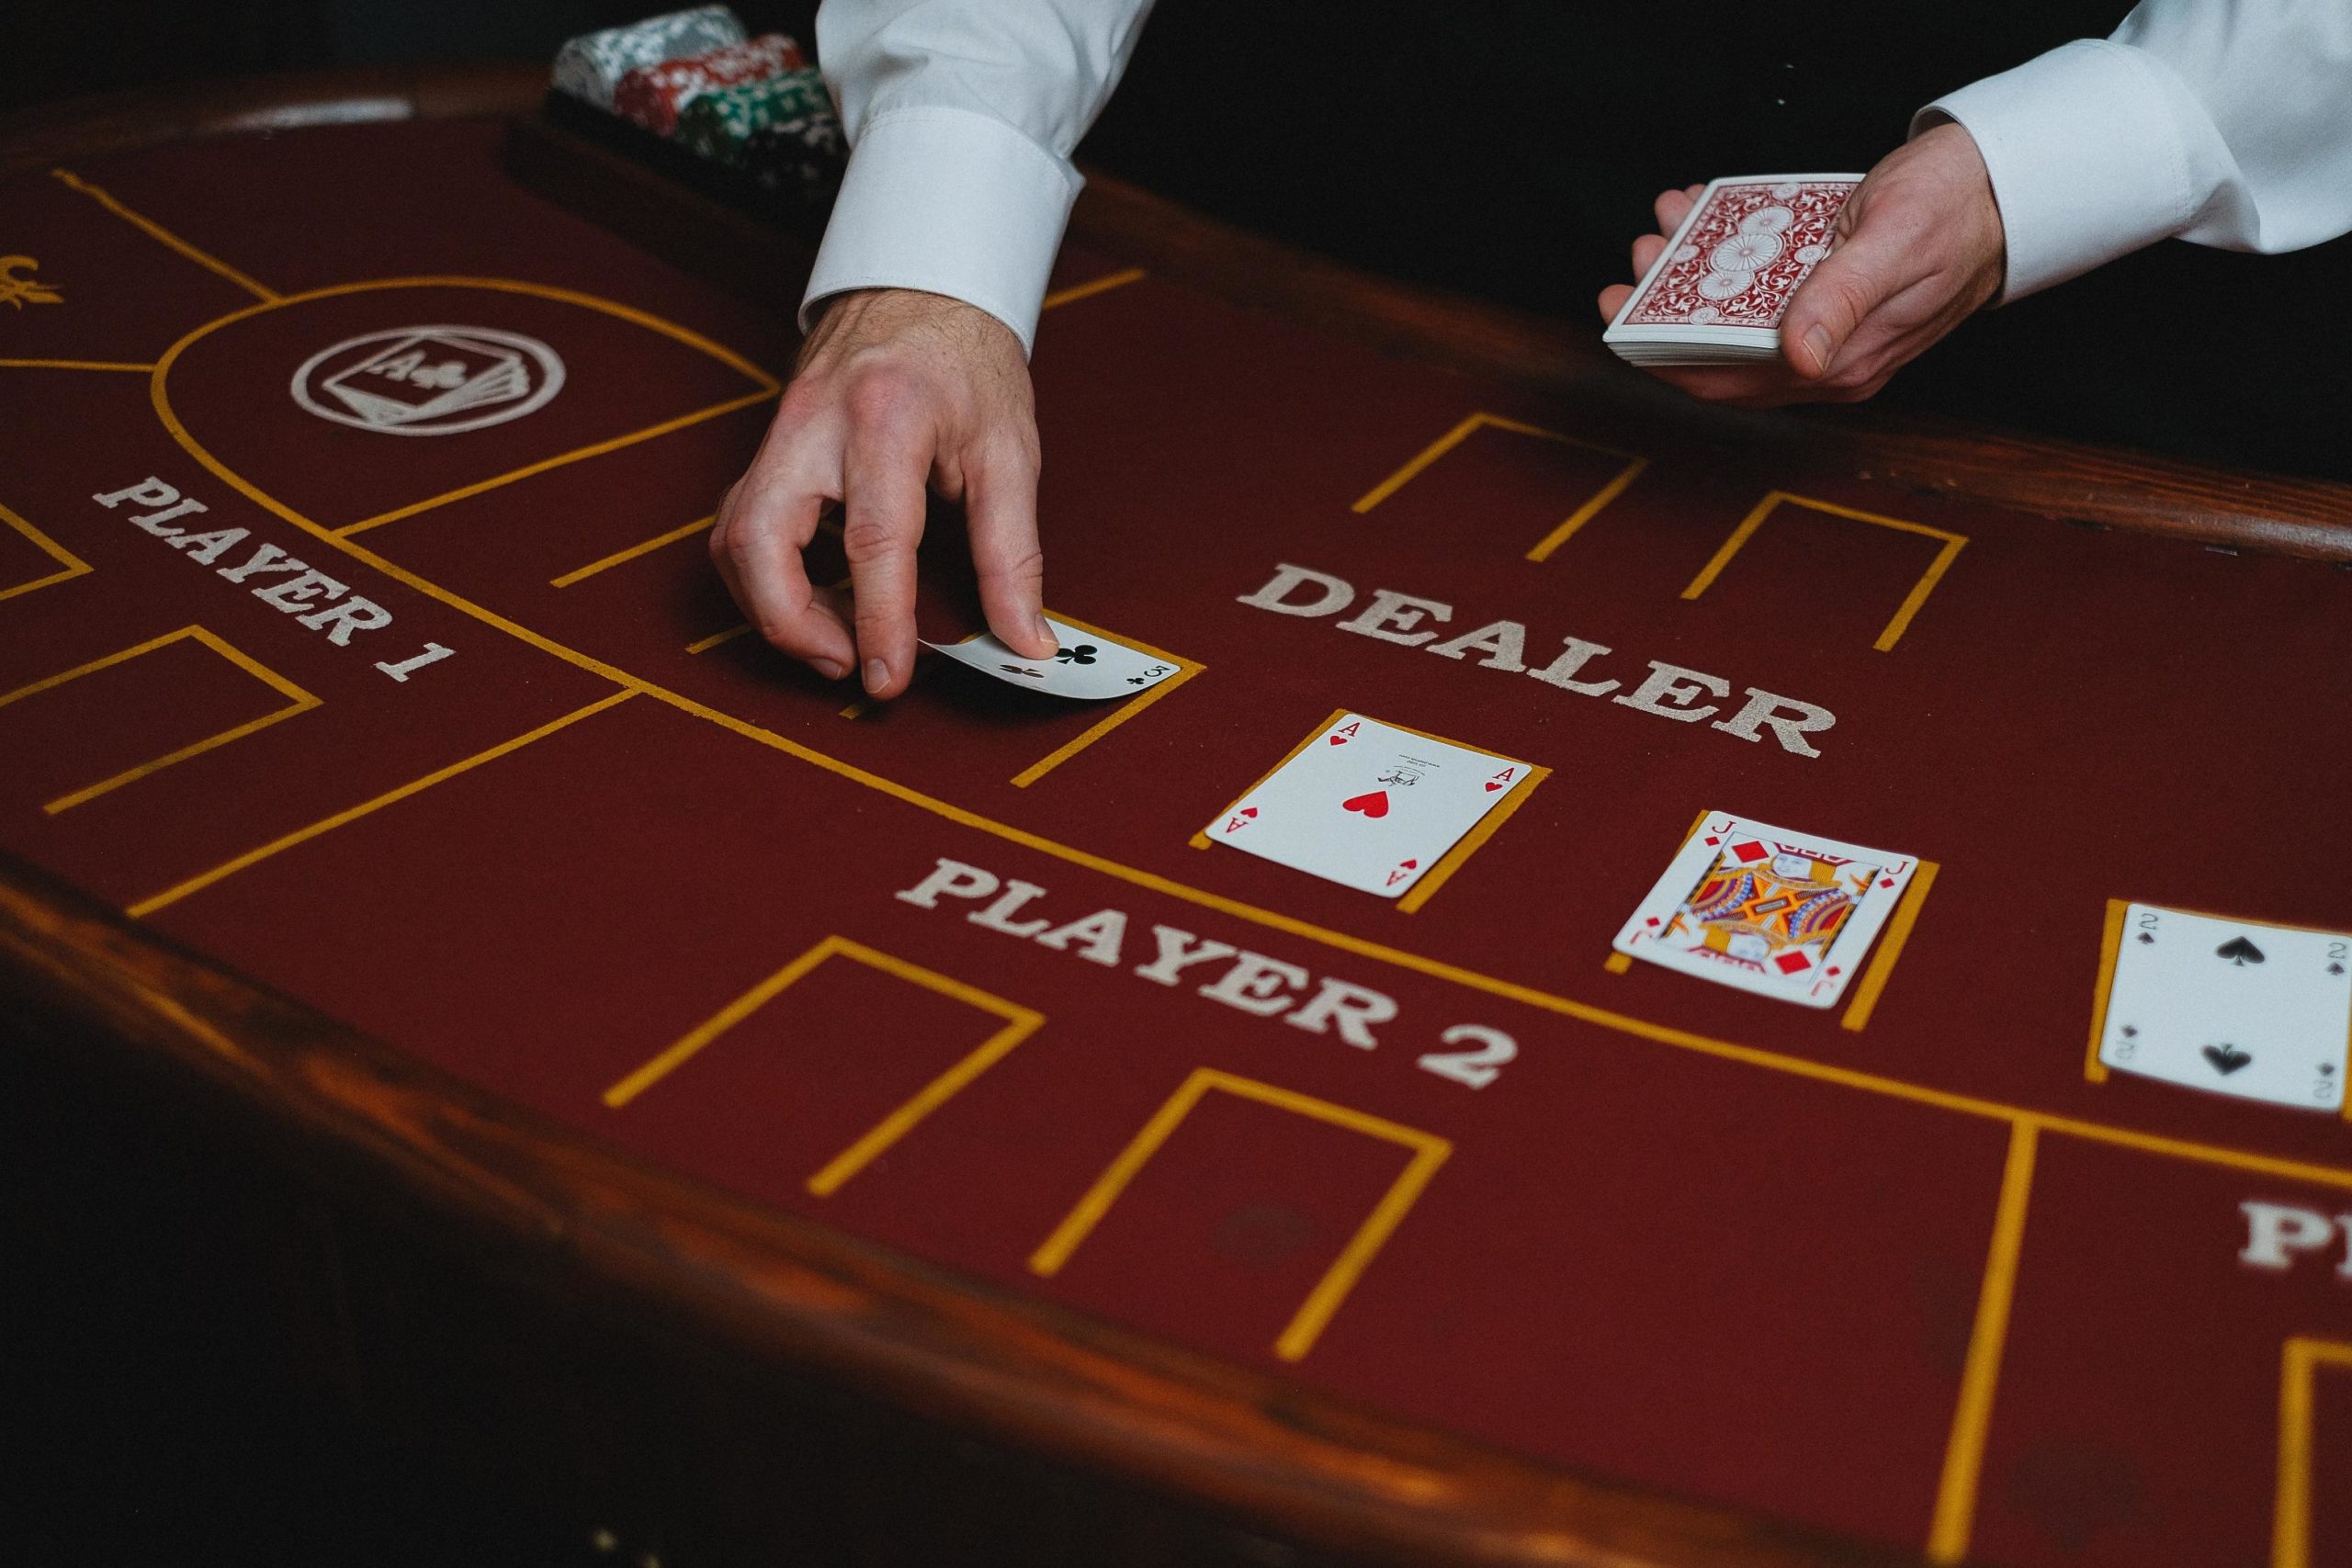 How to Gamble Responsibly: Tips for Keeping It Fun and Safe